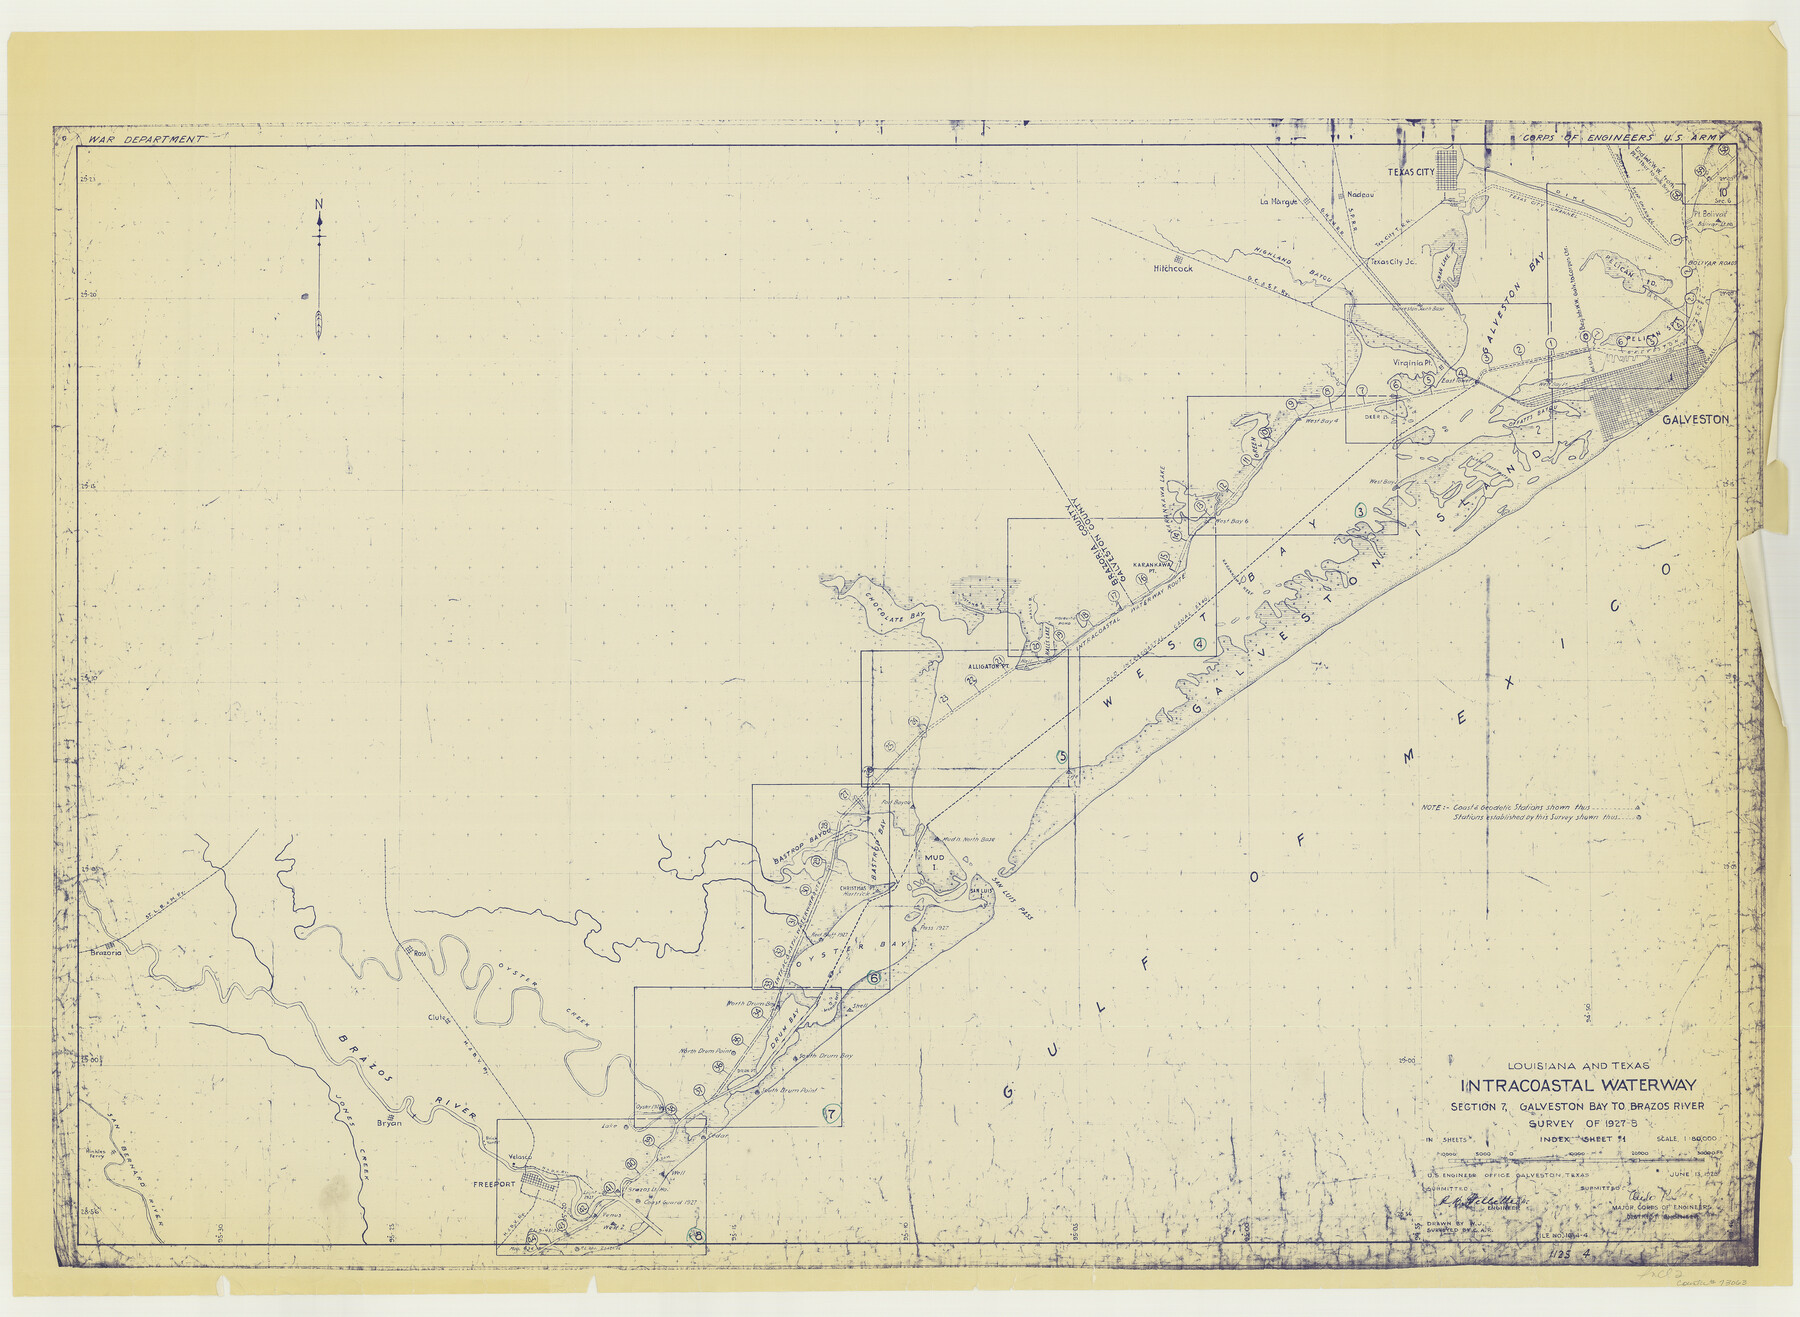 73063, Louisiana and Texas Intracoastal Waterway, Section 7, Galveston Bay to Brazos River and Section 8, Brazos River to Matagorda Bay, General Map Collection